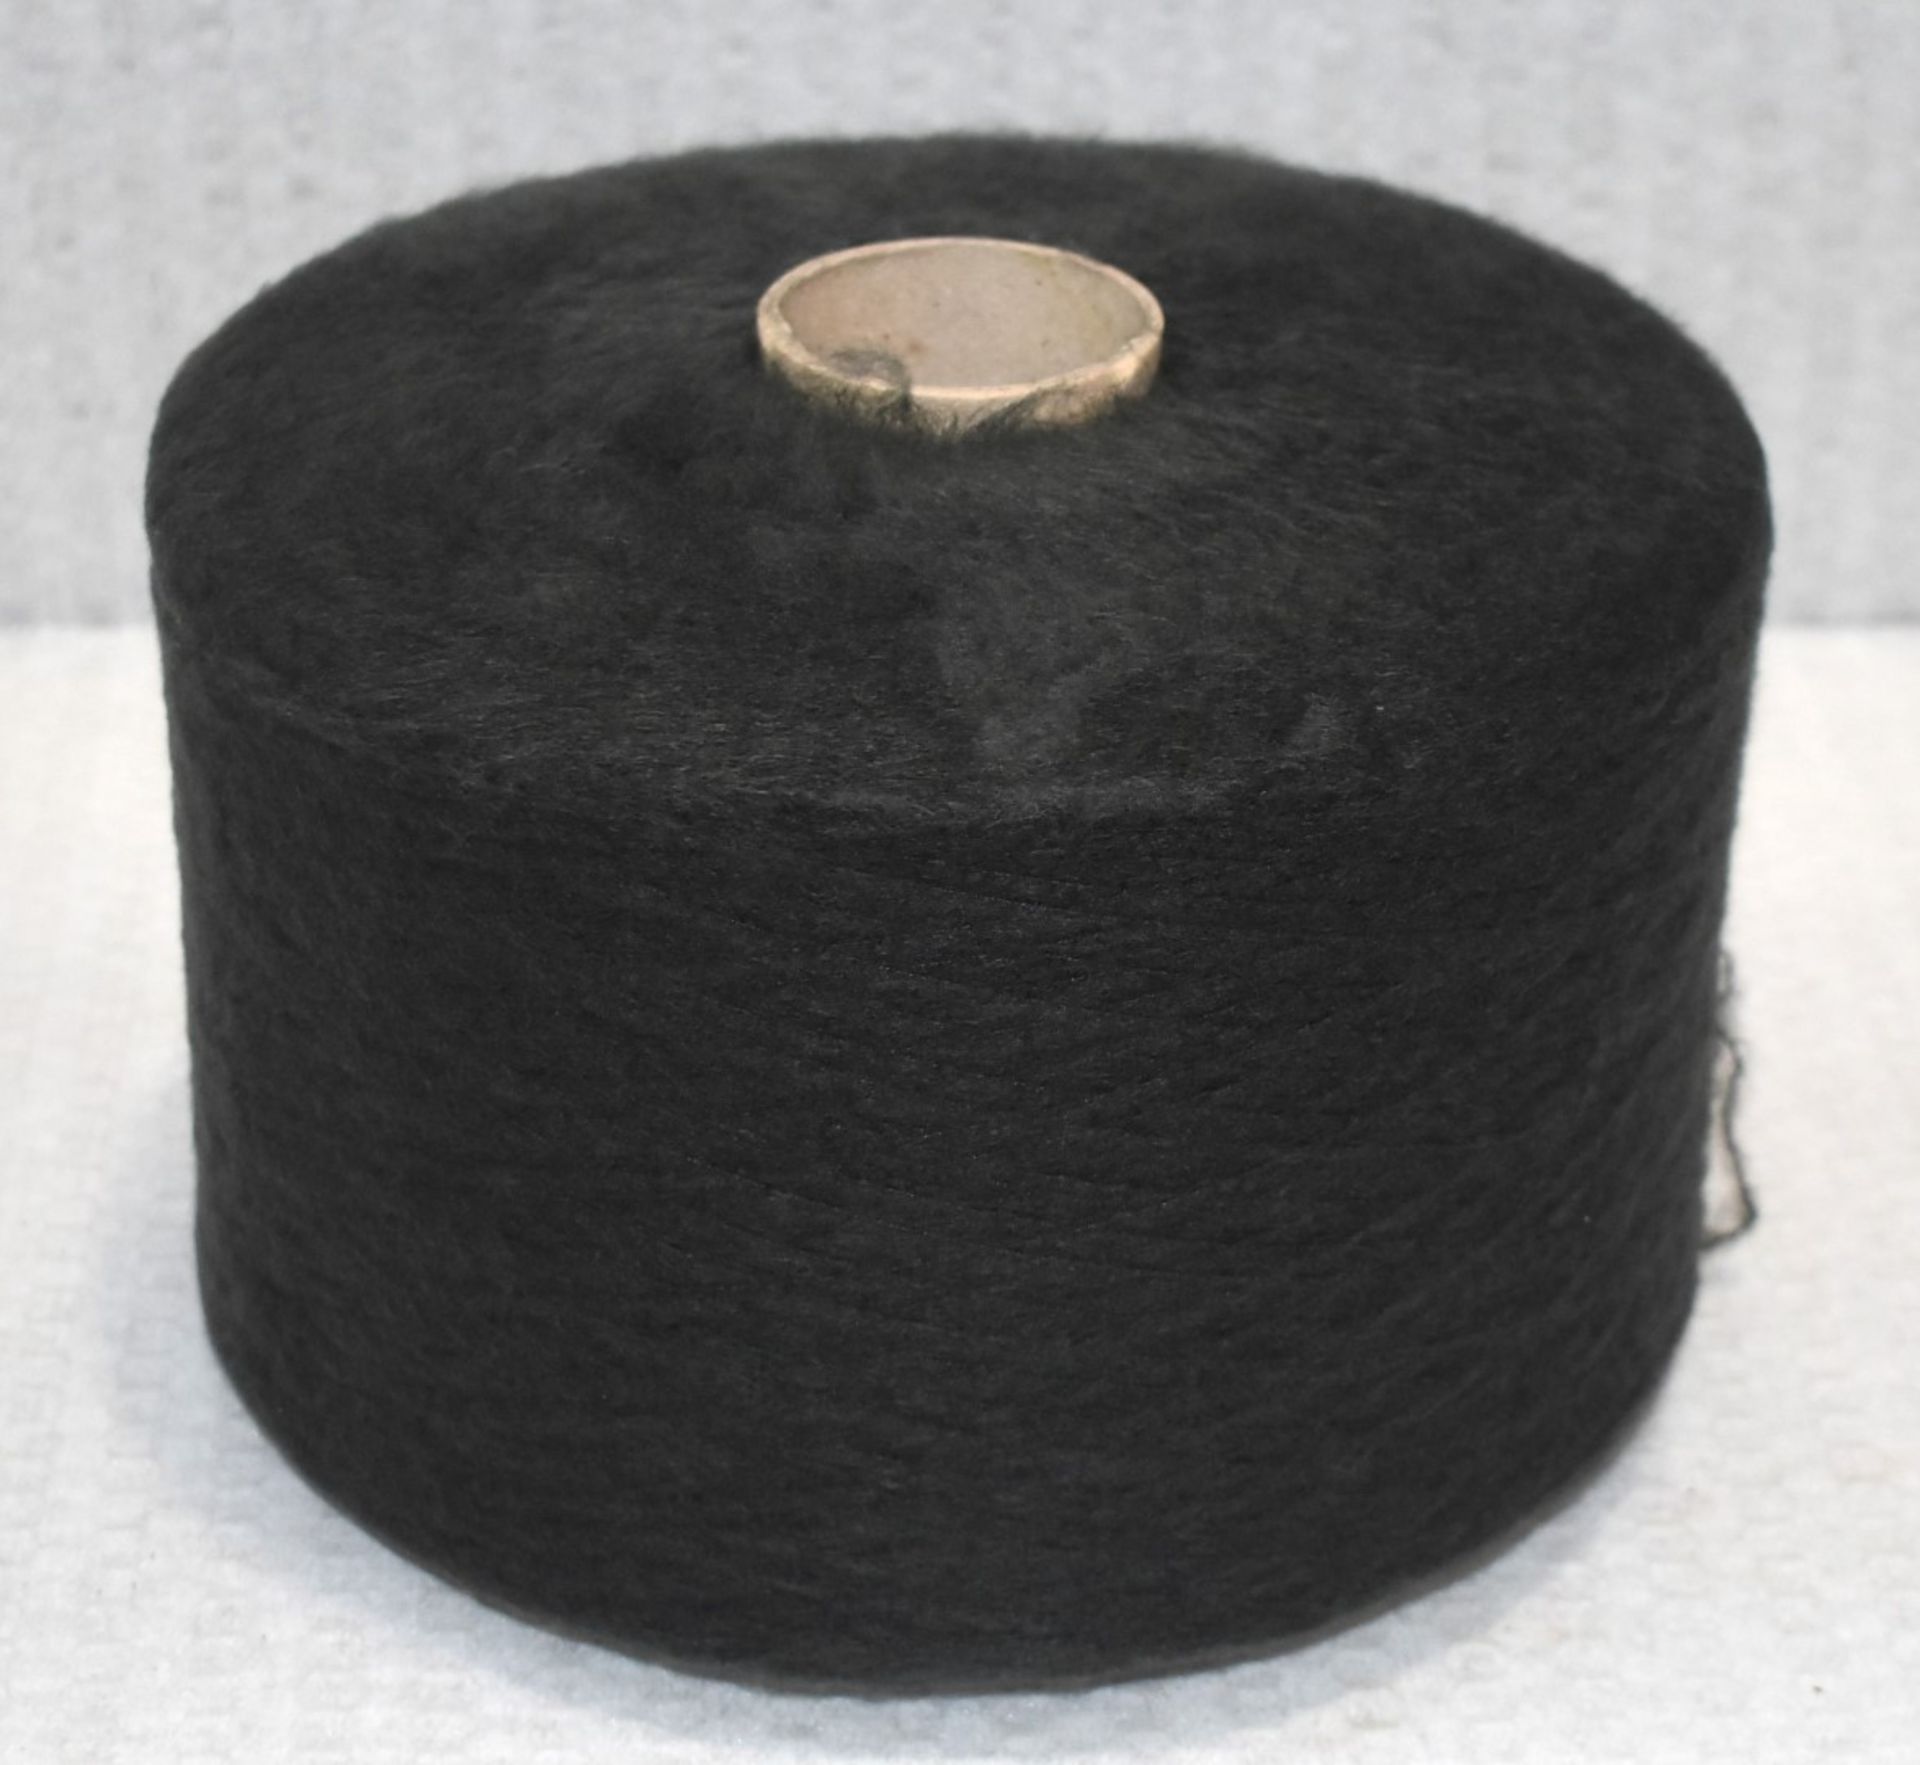 12 x Cones of 1/7,5 Lagona Knitting Yarn - Charcoal - Approx Weight: 2,300g - New Stock ABL Yarn - Image 6 of 11